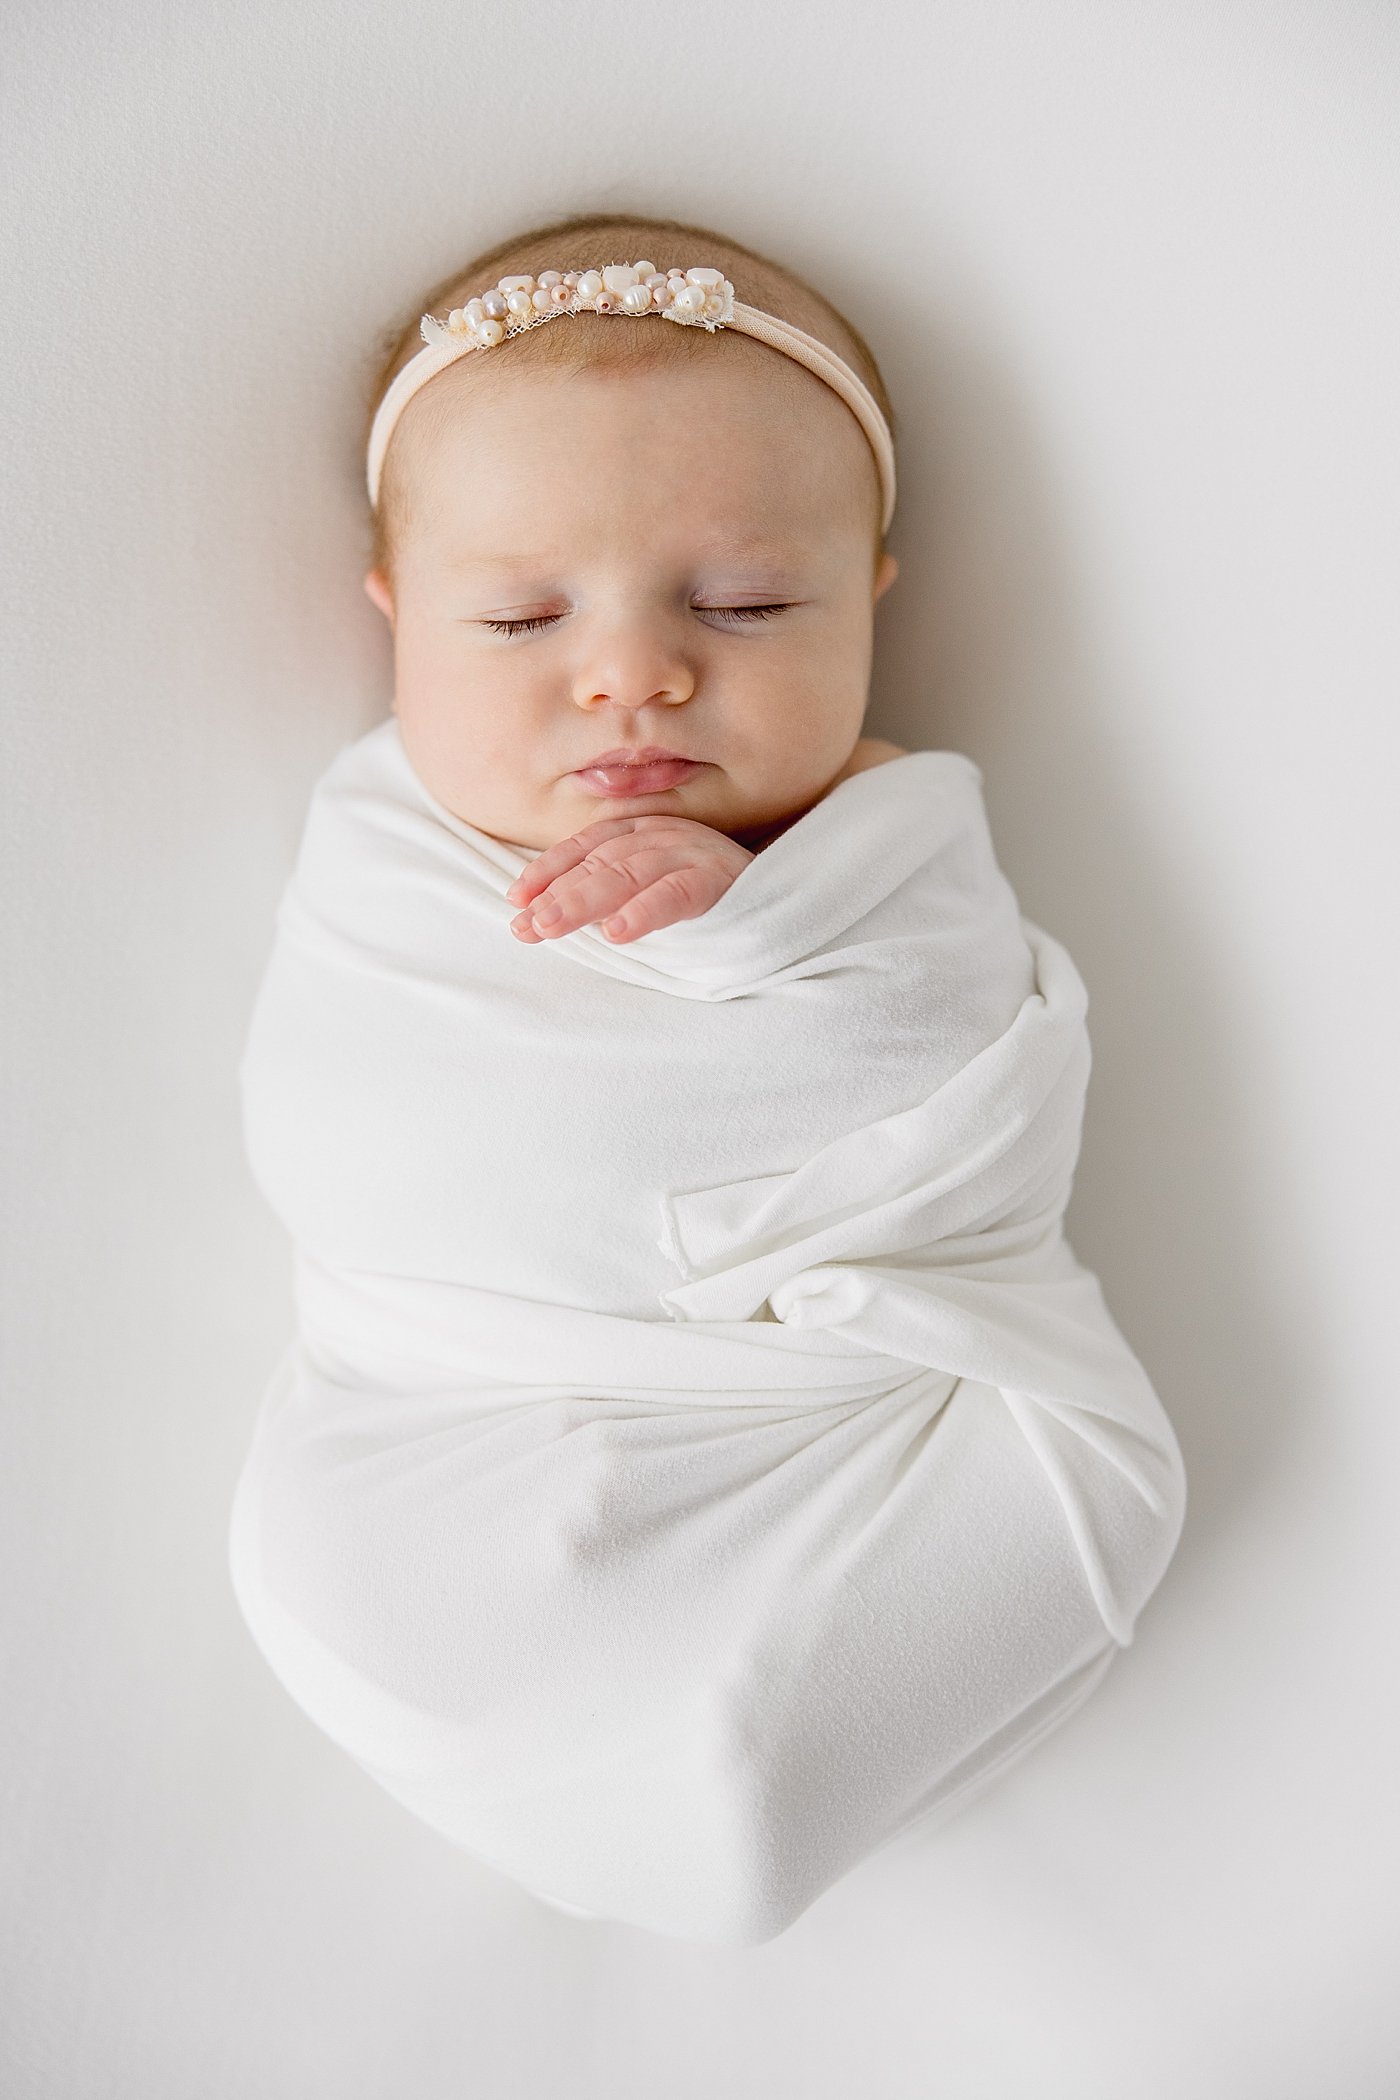 Baby Girl in Swaddle | Ambre Williams Photography